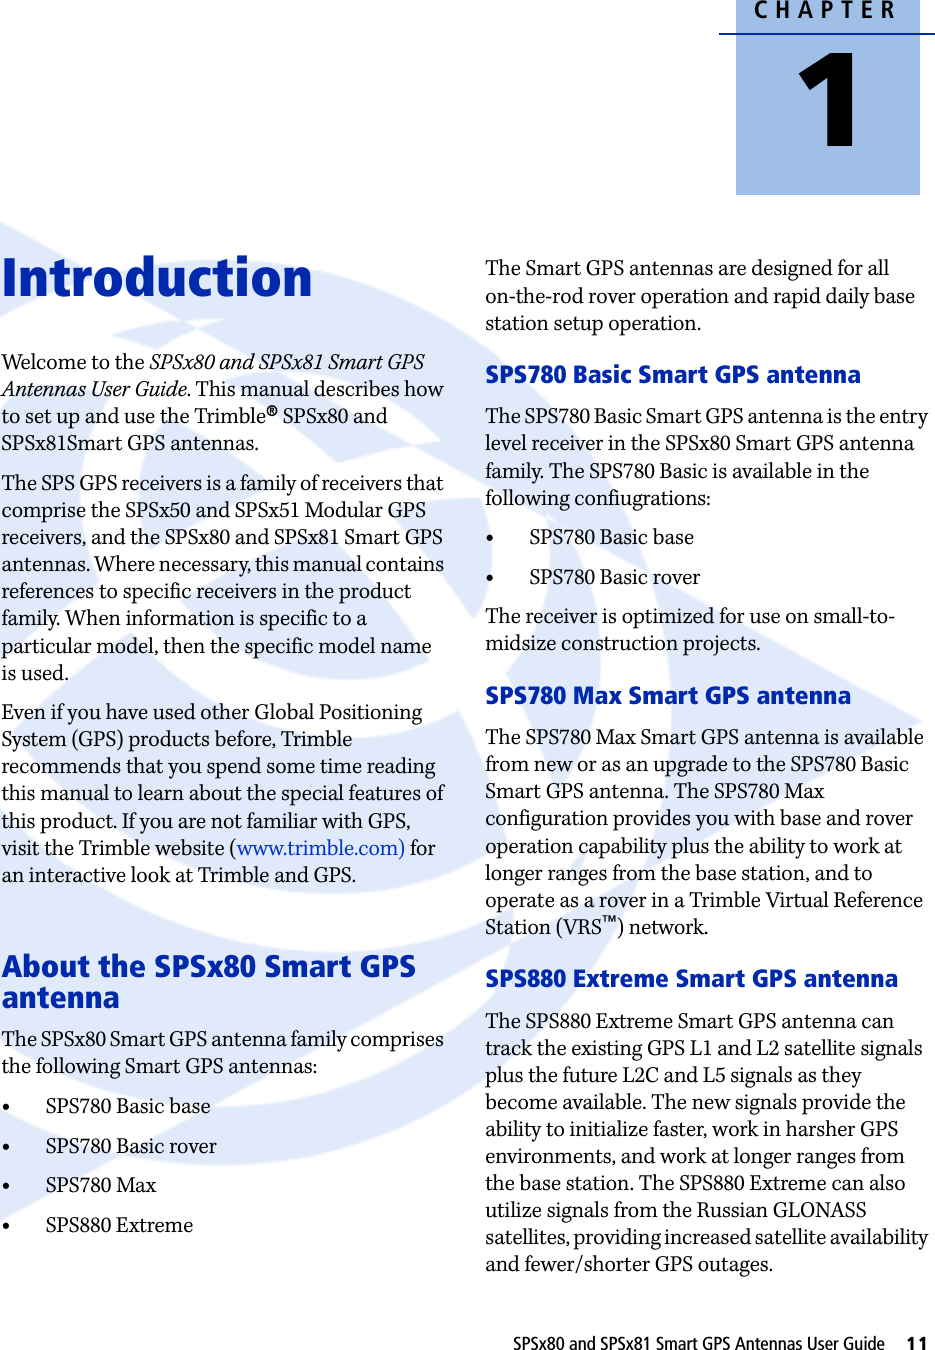 CHAPTER1SPSx80 and SPSx81 Smart GPS Antennas User Guide     11Introduction 1Welcome to the SPSx80 and SPSx81 Smart GPS Antennas User Guide. This manual describes how to set up and use the Trimble® SPSx80 and SPSx81Smart GPS antennas. The SPS GPS receivers is a family of receivers that comprise the SPSx50 and SPSx51 Modular GPS receivers, and the SPSx80 and SPSx81 Smart GPS antennas. Where necessary, this manual contains references to specific receivers in the product family. When information is specific to a particular model, then the specific model name is used. Even if you have used other Global Positioning System (GPS) products before, Trimble recommends that you spend some time reading this manual to learn about the special features of this product. If you are not familiar with GPS, visit the Trimble website (www.trimble.com) for an interactive look at Trimble and GPS.About the SPSx80 Smart GPS antennaThe SPSx80 Smart GPS antenna family comprises the following Smart GPS antennas:•SPS780 Basic base•SPS780 Basic rover•SPS780 Max•SPS880 ExtremeThe Smart GPS antennas are designed for all on-the-rod rover operation and rapid daily base station setup operation.SPS780 Basic Smart GPS antennaThe SPS780 Basic Smart GPS antenna is the entry level receiver in the SPSx80 Smart GPS antenna family. The SPS780 Basic is available in the following confiugrations:•SPS780 Basic base•SPS780 Basic roverThe receiver is optimized for use on small-to-midsize construction projects. SPS780 Max Smart GPS antennaThe SPS780 Max Smart GPS antenna is available from new or as an upgrade to the SPS780 Basic Smart GPS antenna. The SPS780 Max configuration provides you with base and rover operation capability plus the ability to work at longer ranges from the base station, and to operate as a rover in a Trimble Virtual Reference Station (VRS™) network.SPS880 Extreme Smart GPS antennaThe SPS880 Extreme Smart GPS antenna can track the existing GPS L1 and L2 satellite signals plus the future L2C and L5 signals as they become available. The new signals provide the ability to initialize faster, work in harsher GPS environments, and work at longer ranges from the base station. The SPS880 Extreme can also utilize signals from the Russian GLONASS satellites, providing increased satellite availability and fewer/shorter GPS outages.